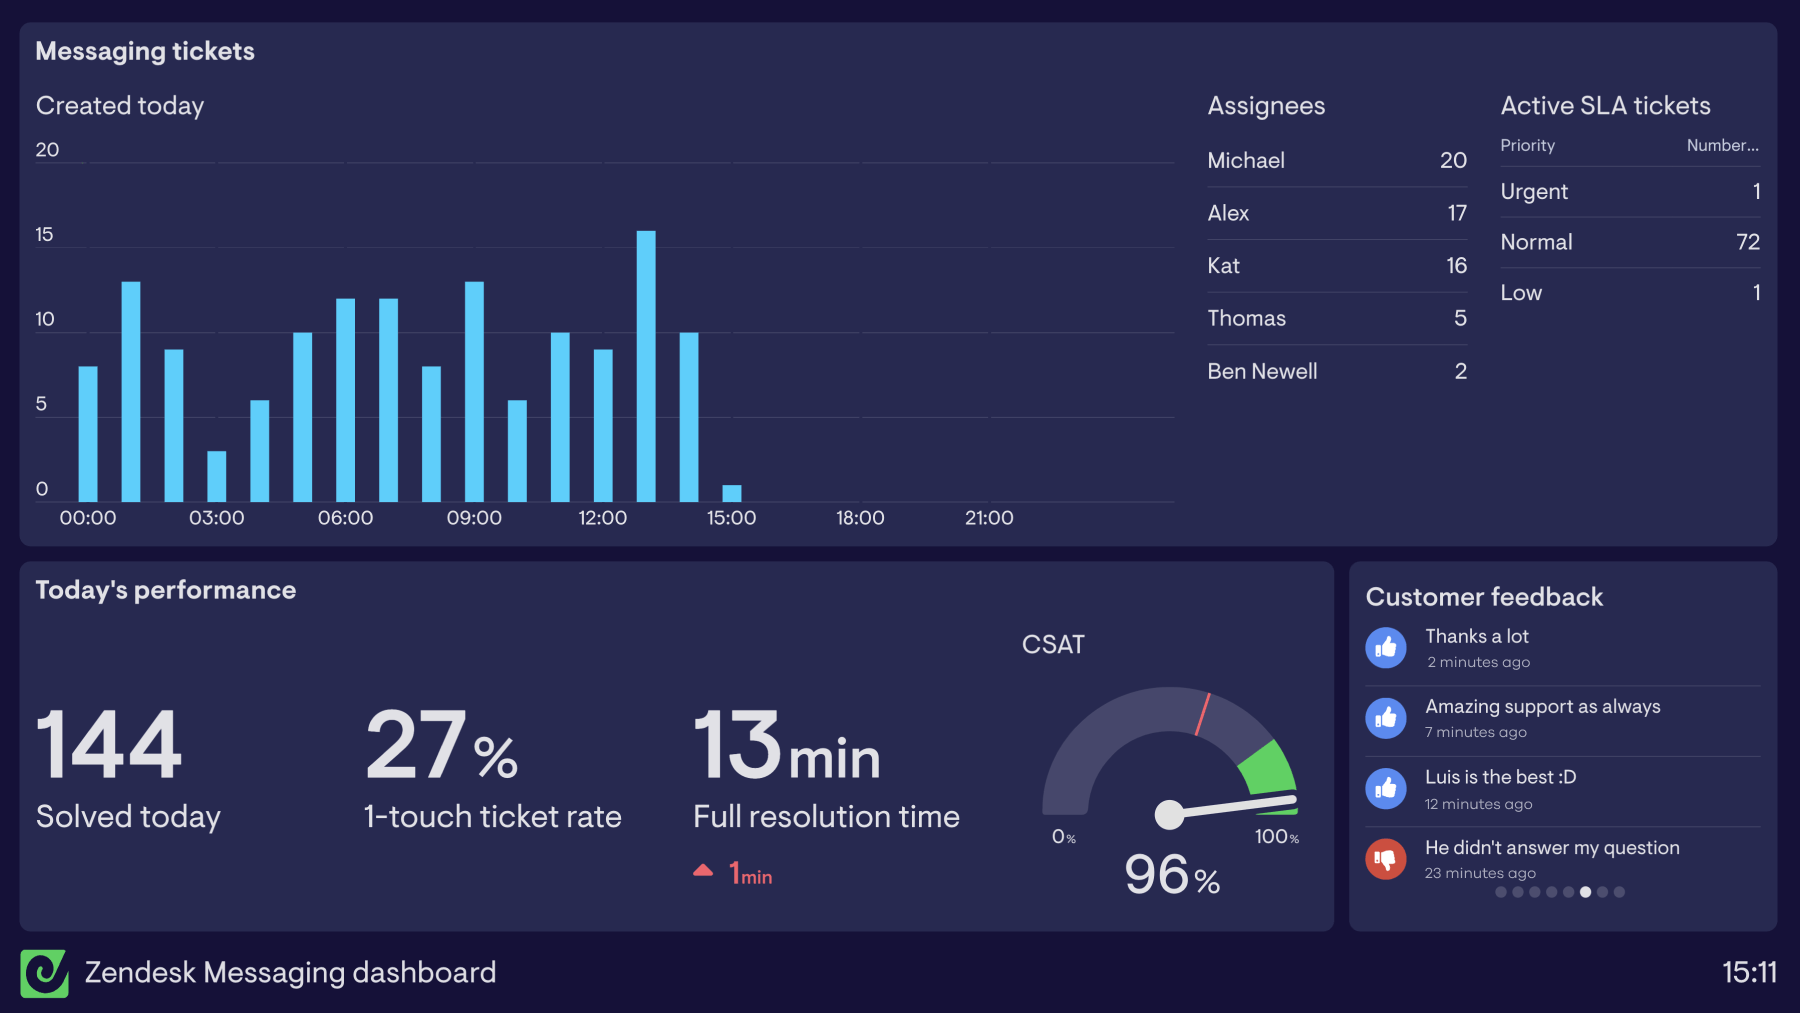 Example of a dashboard used to monitor Zendesk Messaging metrics in real-time.